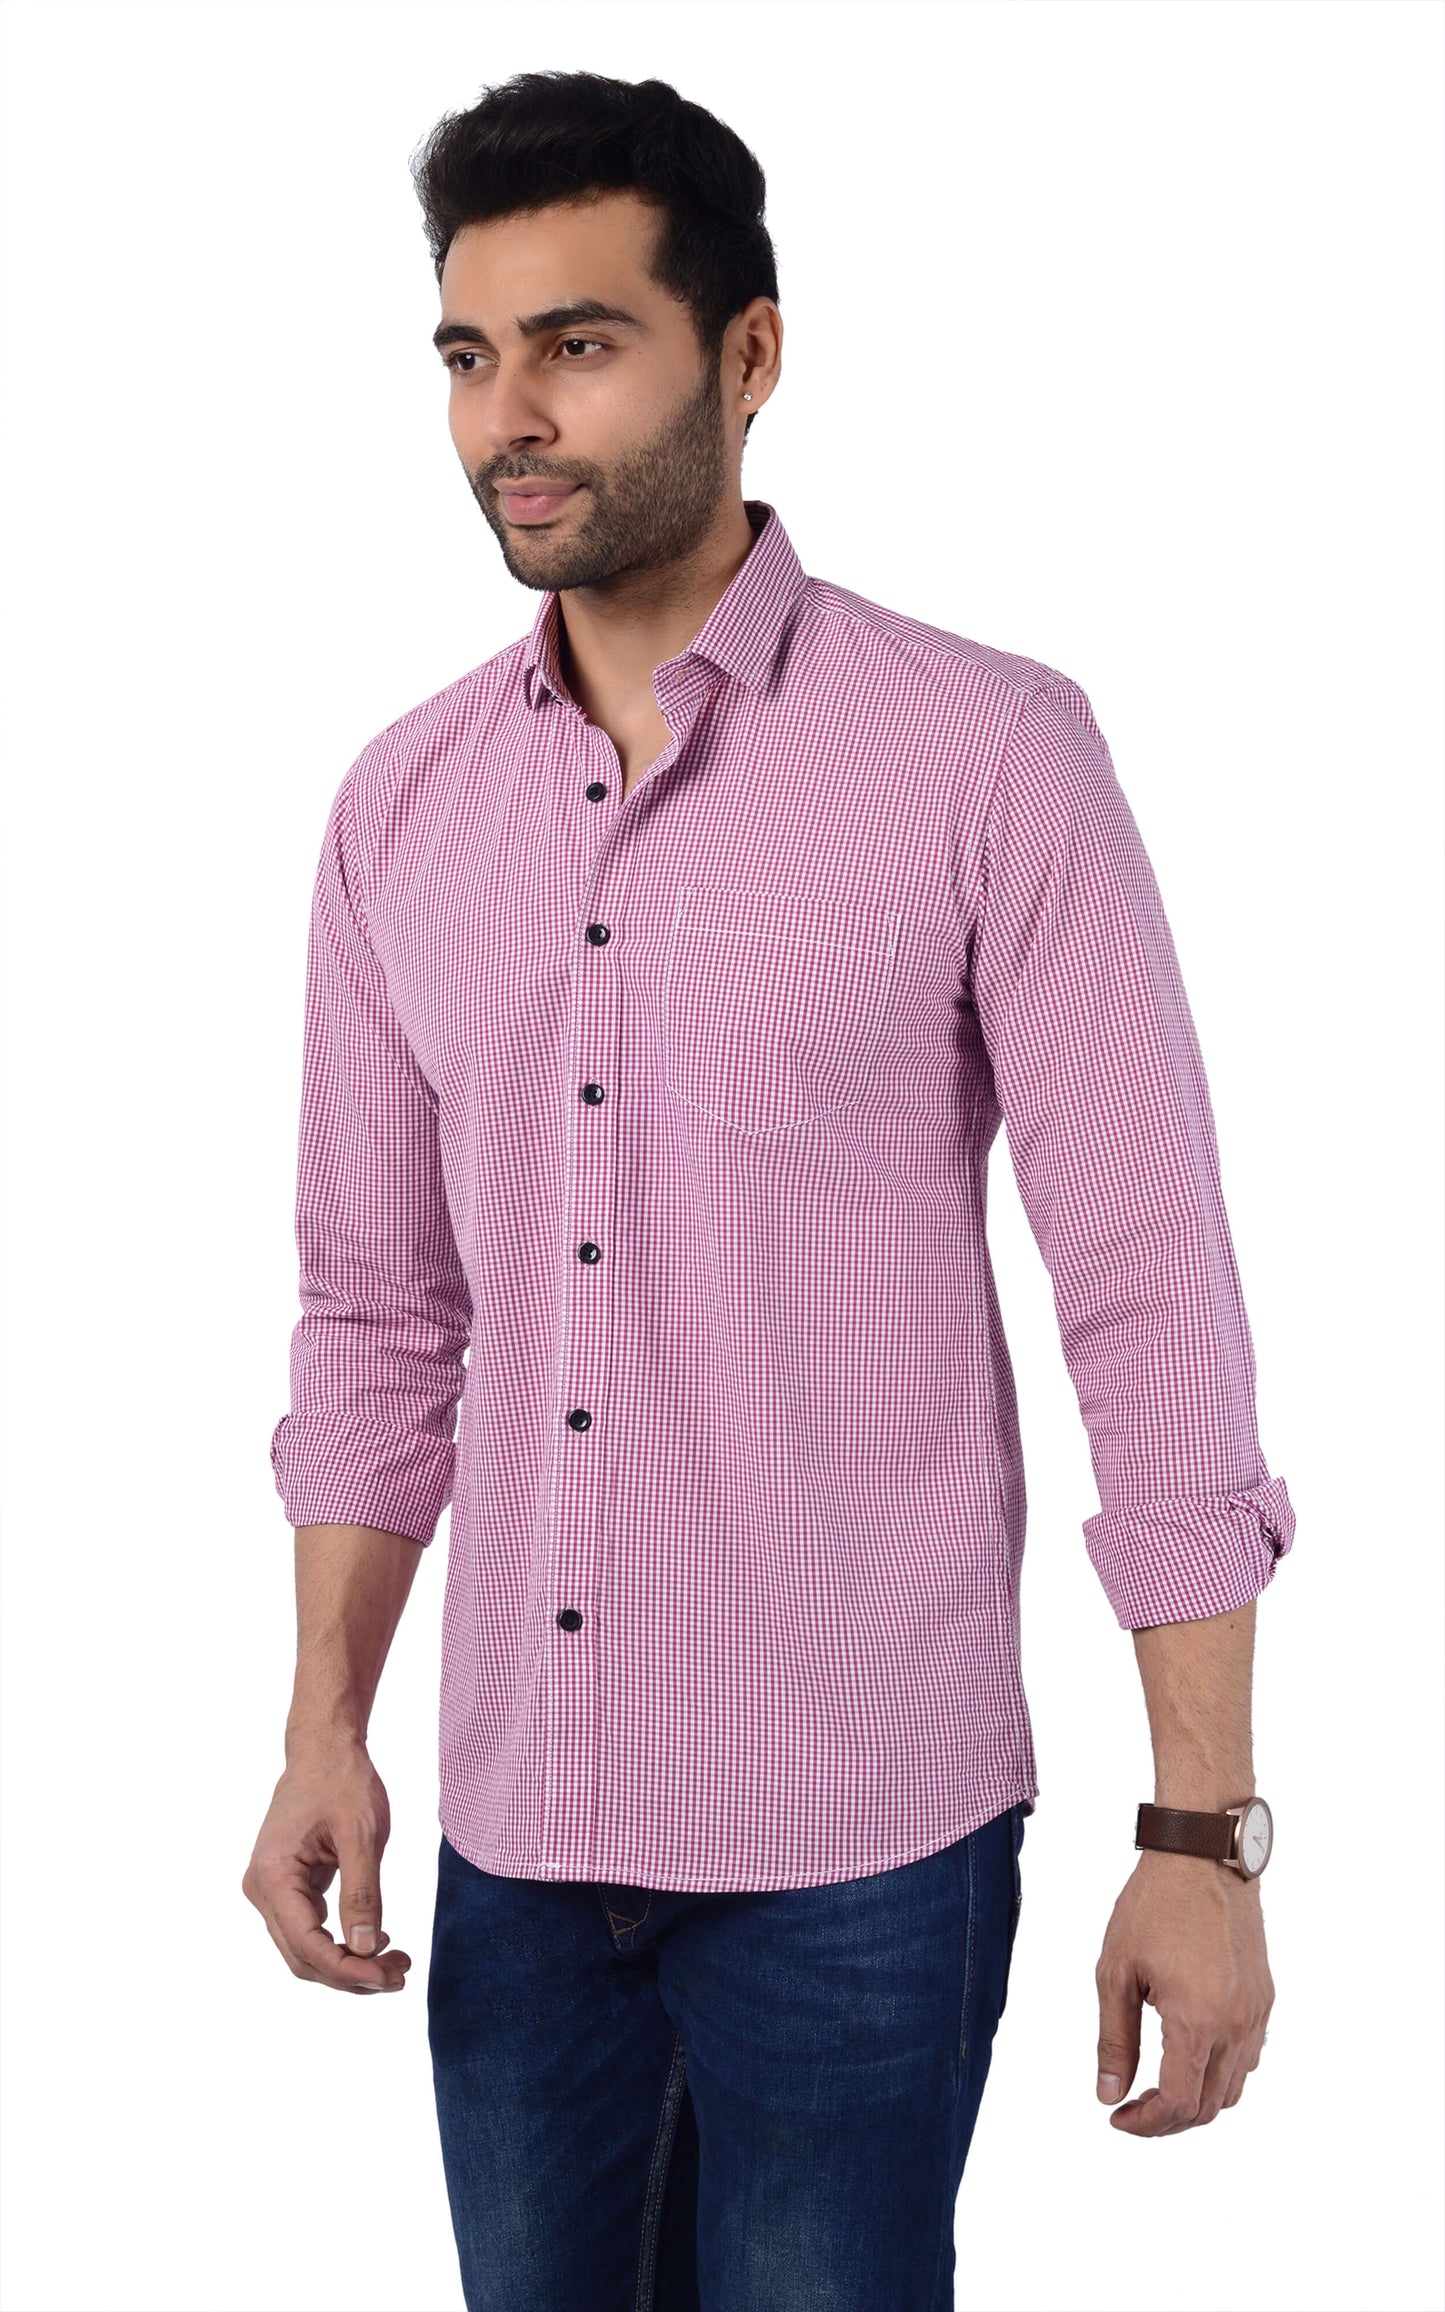 5thanfold Men's Casual Pure Cotton Full Sleeve Checkered Pink Slim Fit Shirt